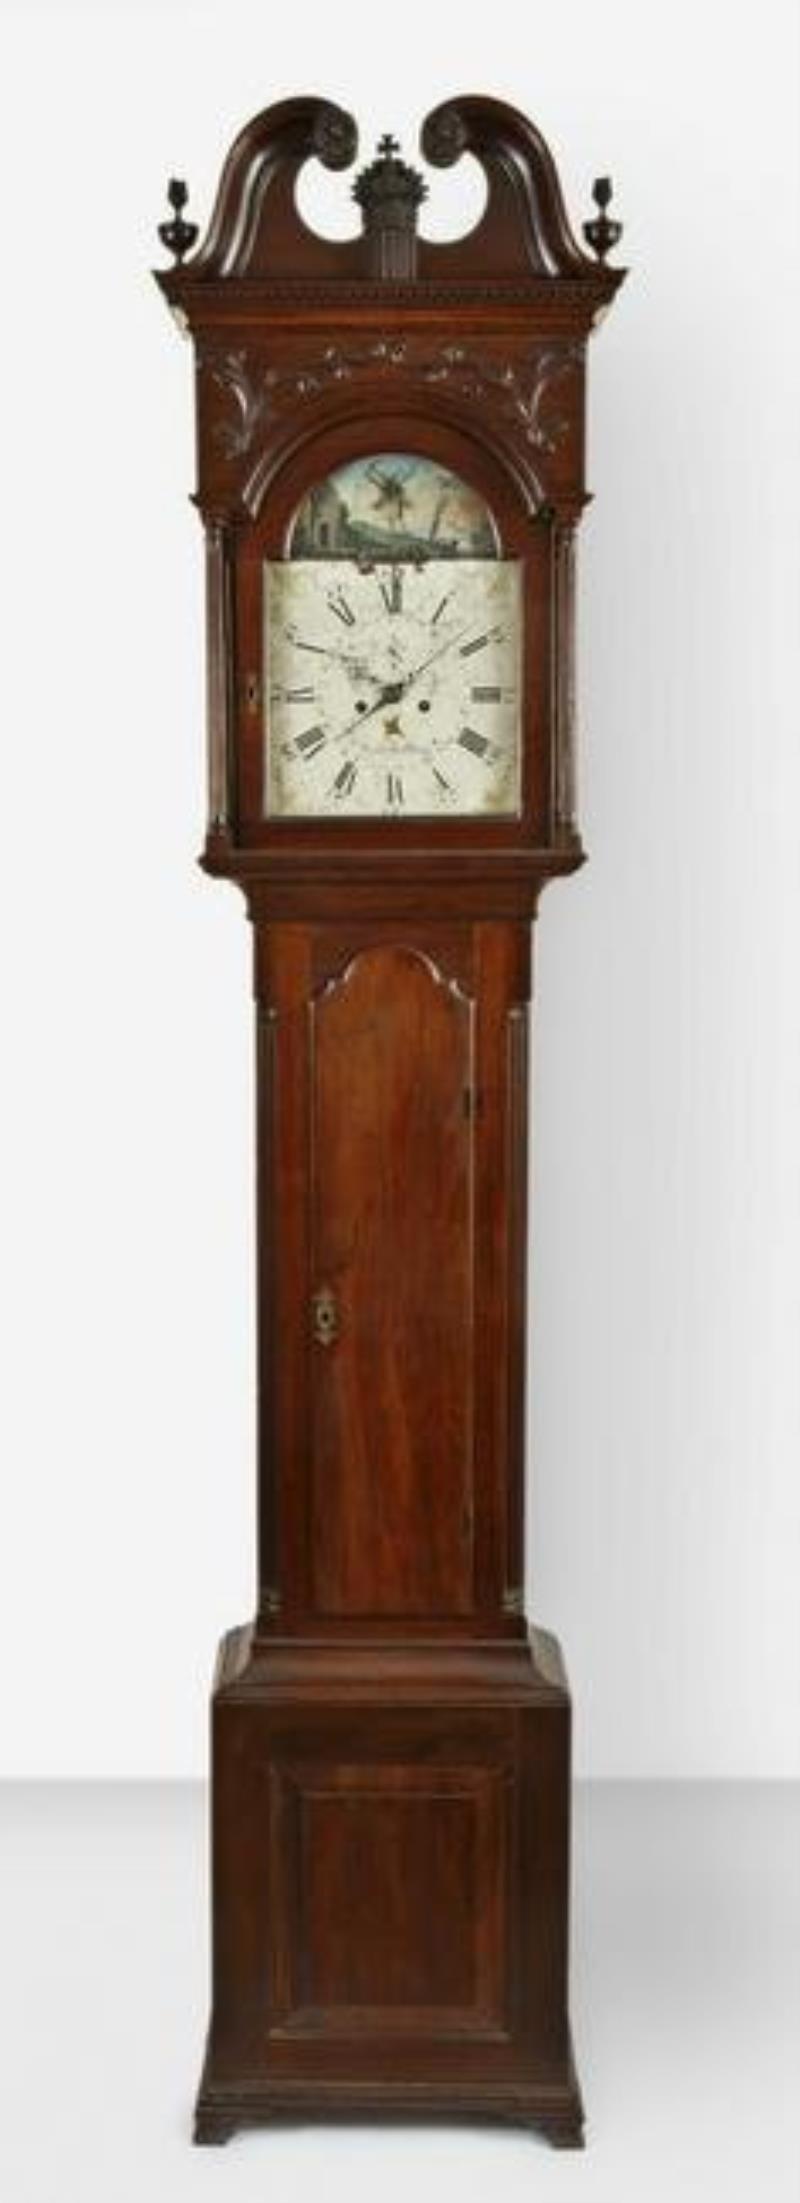 A late 18th century Pennsylvania tall clock with